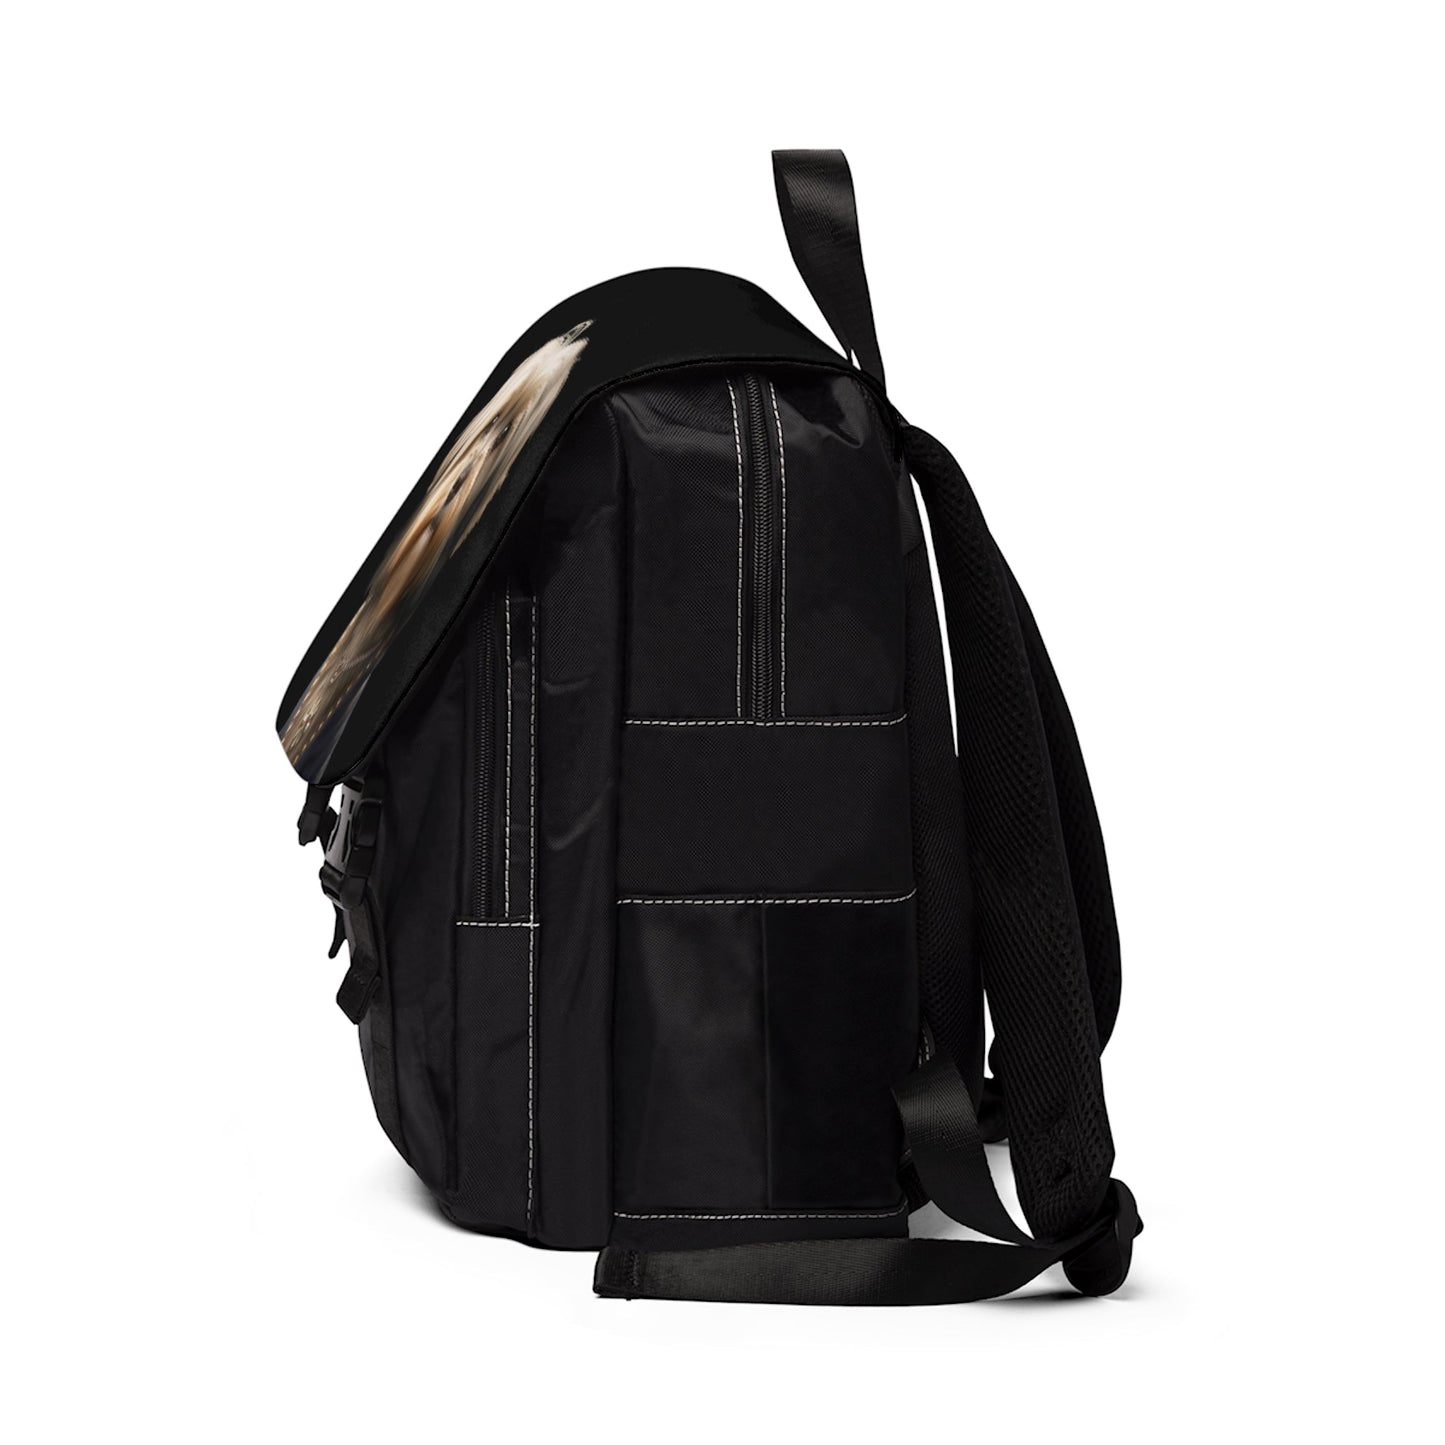 HOTA : Unisex Casual Shoulder Backpack - Shaggy Chic